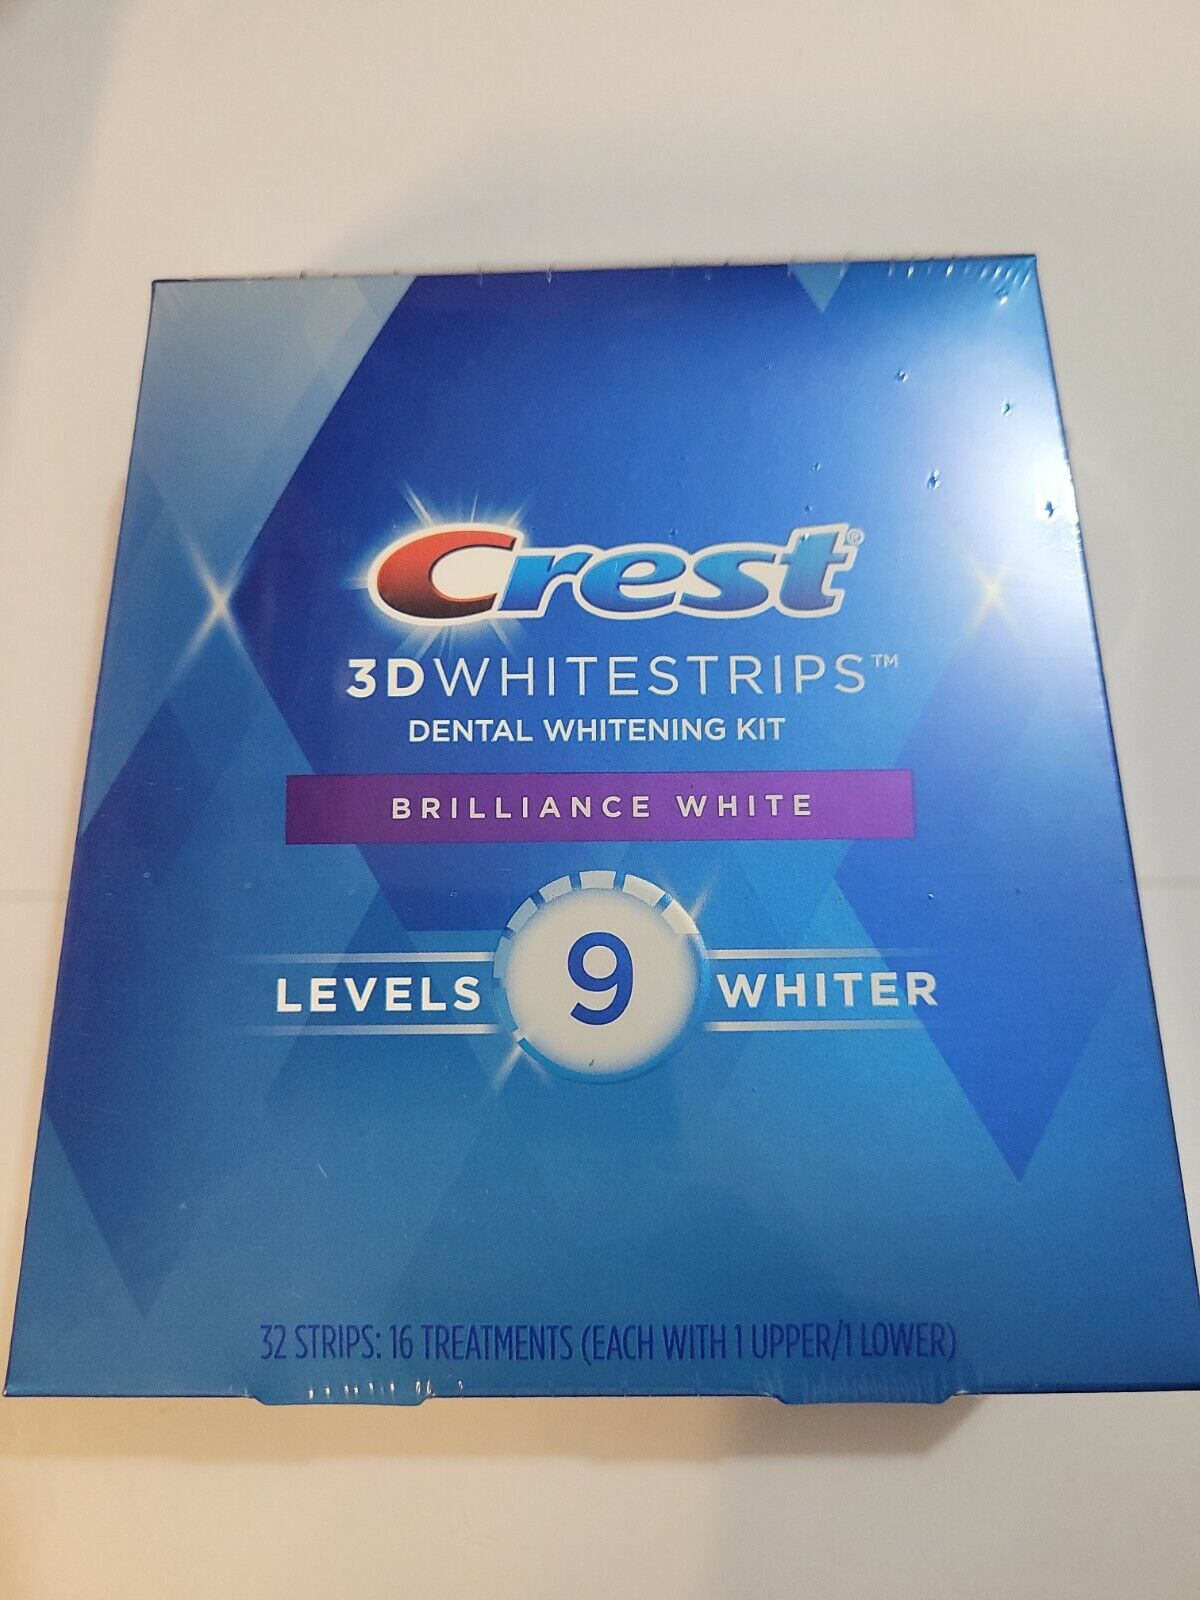 Crest 3D Whitestrips Brilliance San Factory outlet Diego Mall White Teeth 16 Whitening Tre Kit